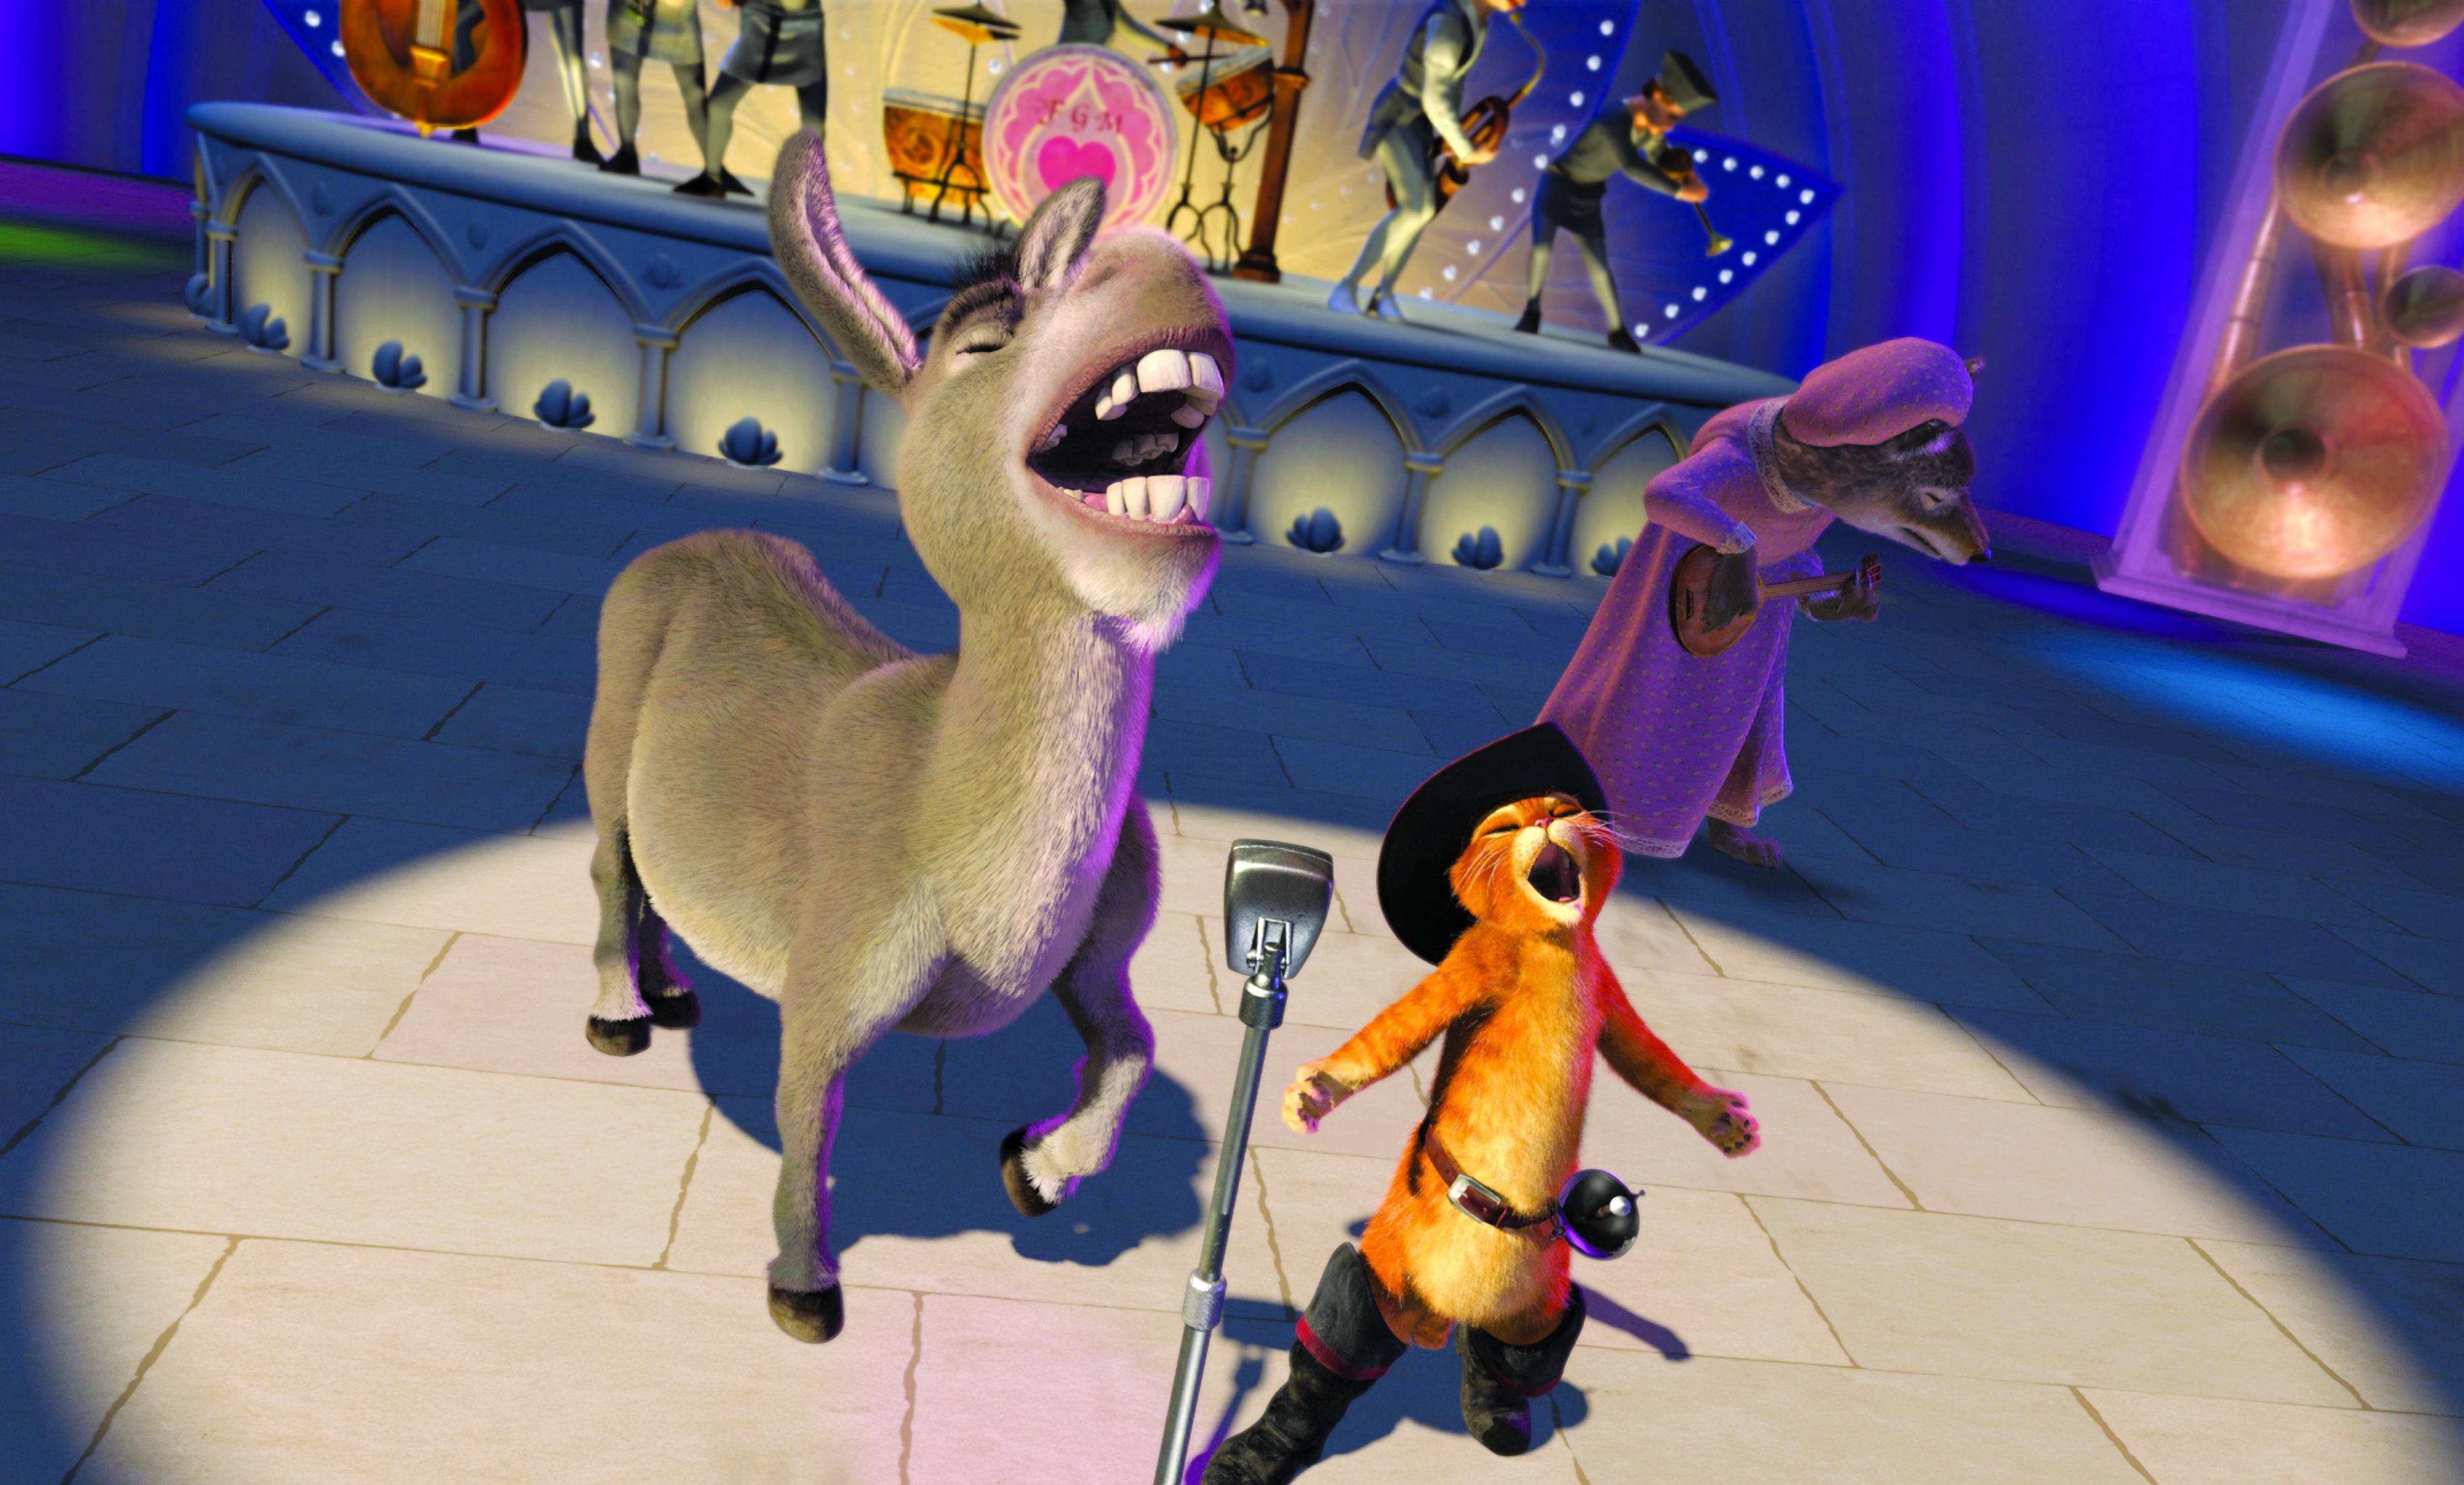 Donkey and Puss in Boots from Shrek, singing into a microphone